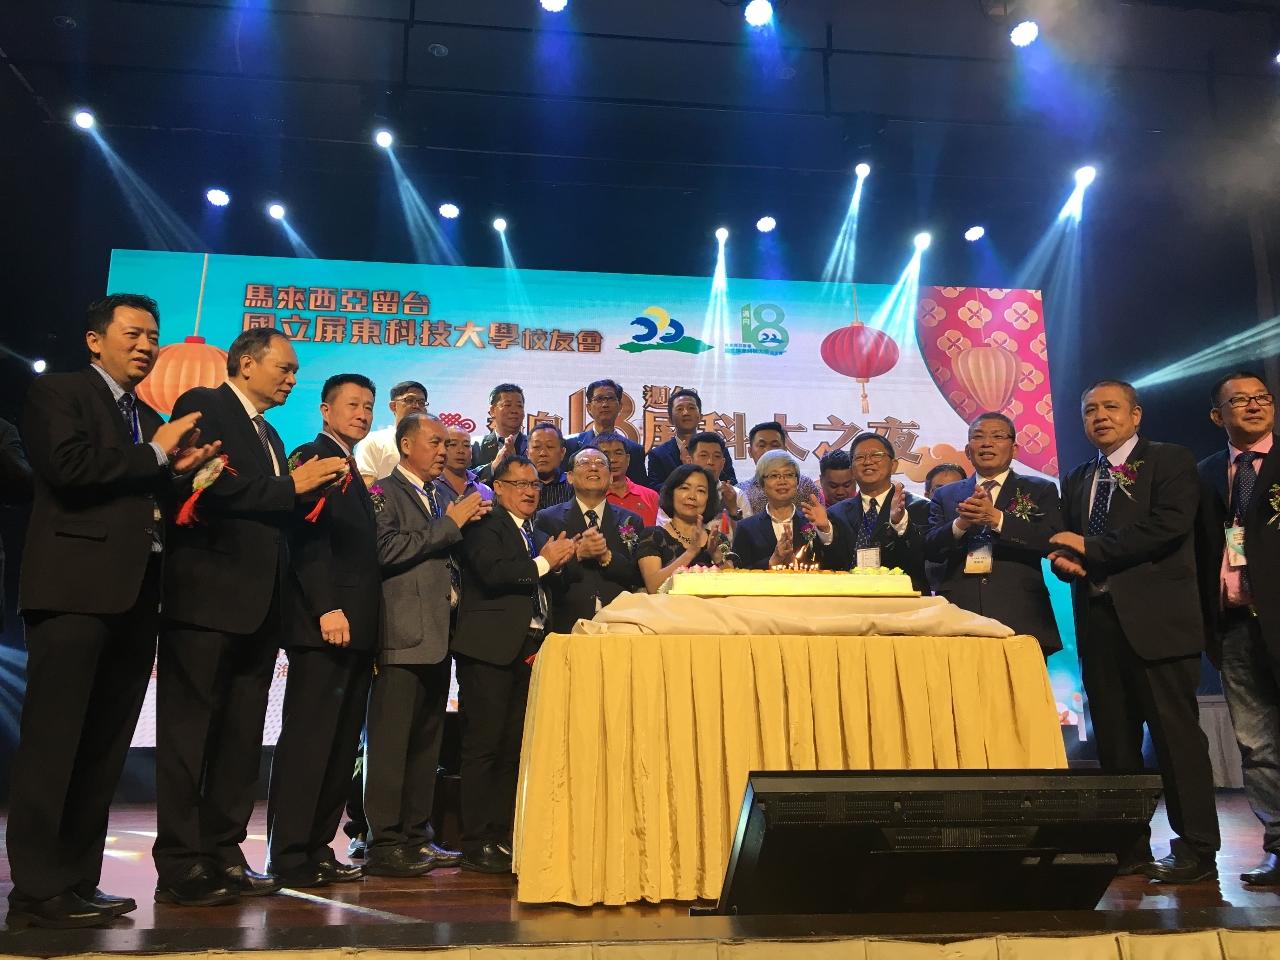 Representative Anne Hung (first row, sixth from right) cuts the cake with the distinguished guests to celebrate.